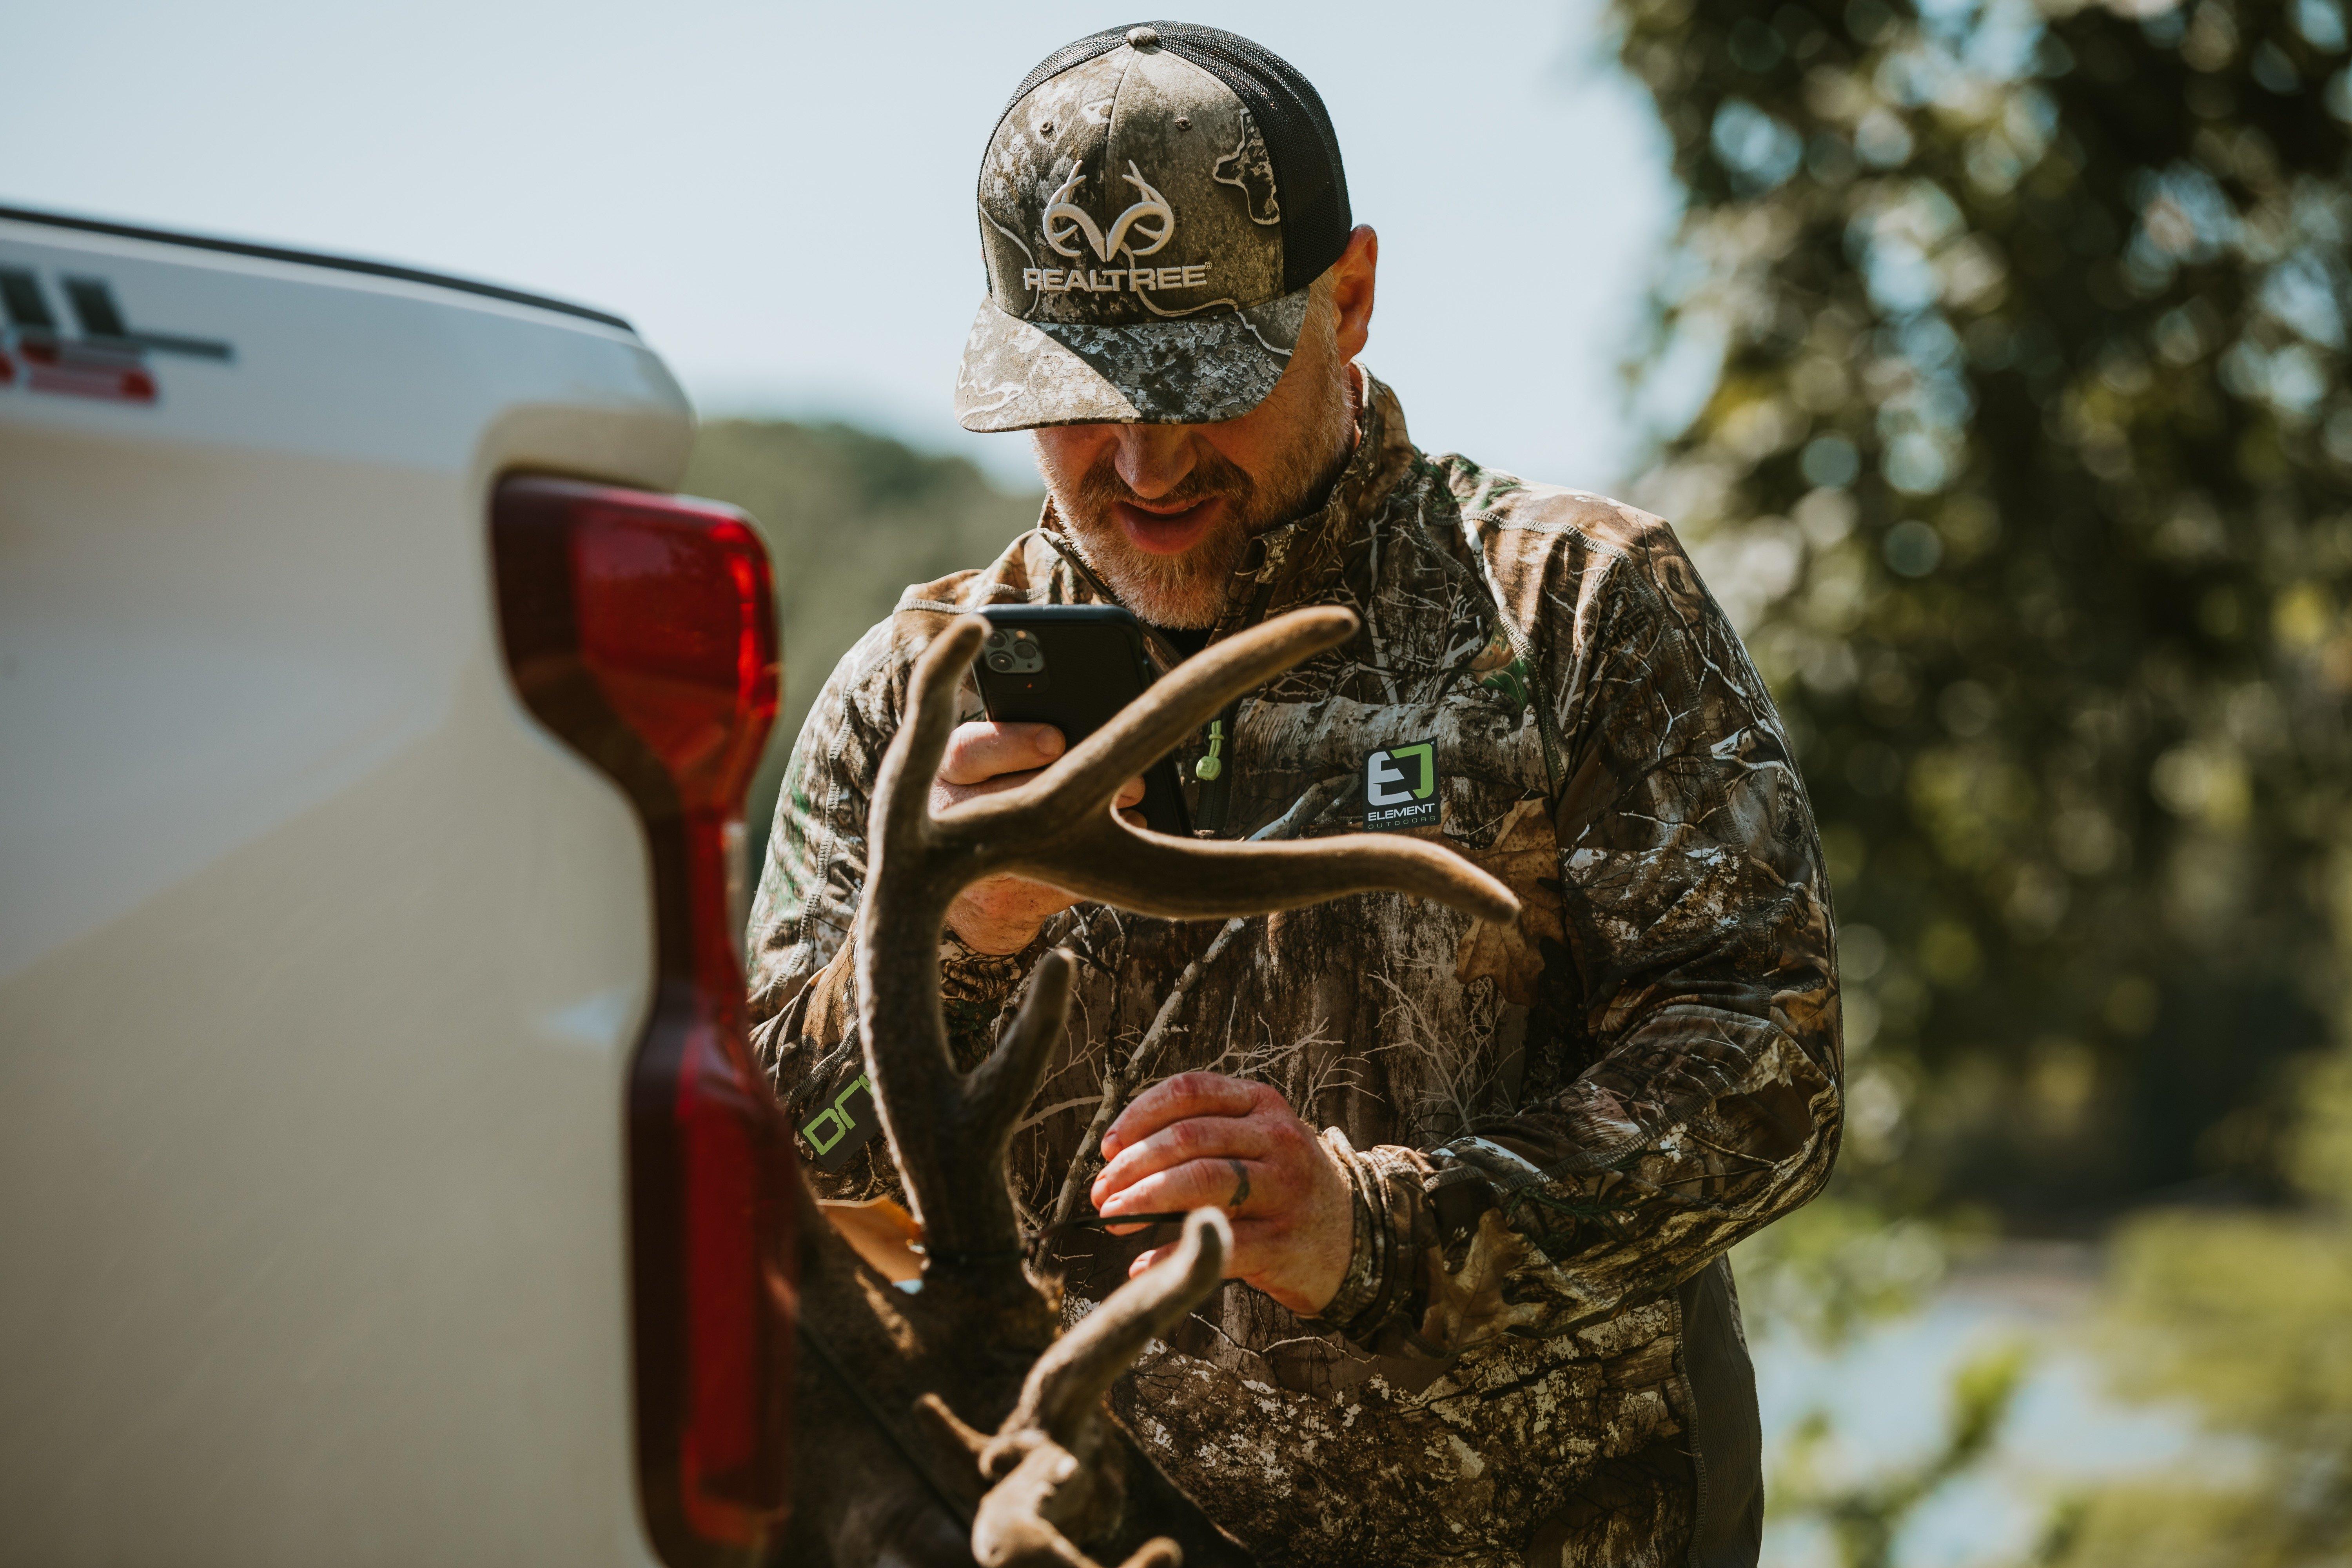 Early bow season is awesome, but it's important to recover your animal and get it chilled as quickly as possible. (Realtree / Kerry Wix)